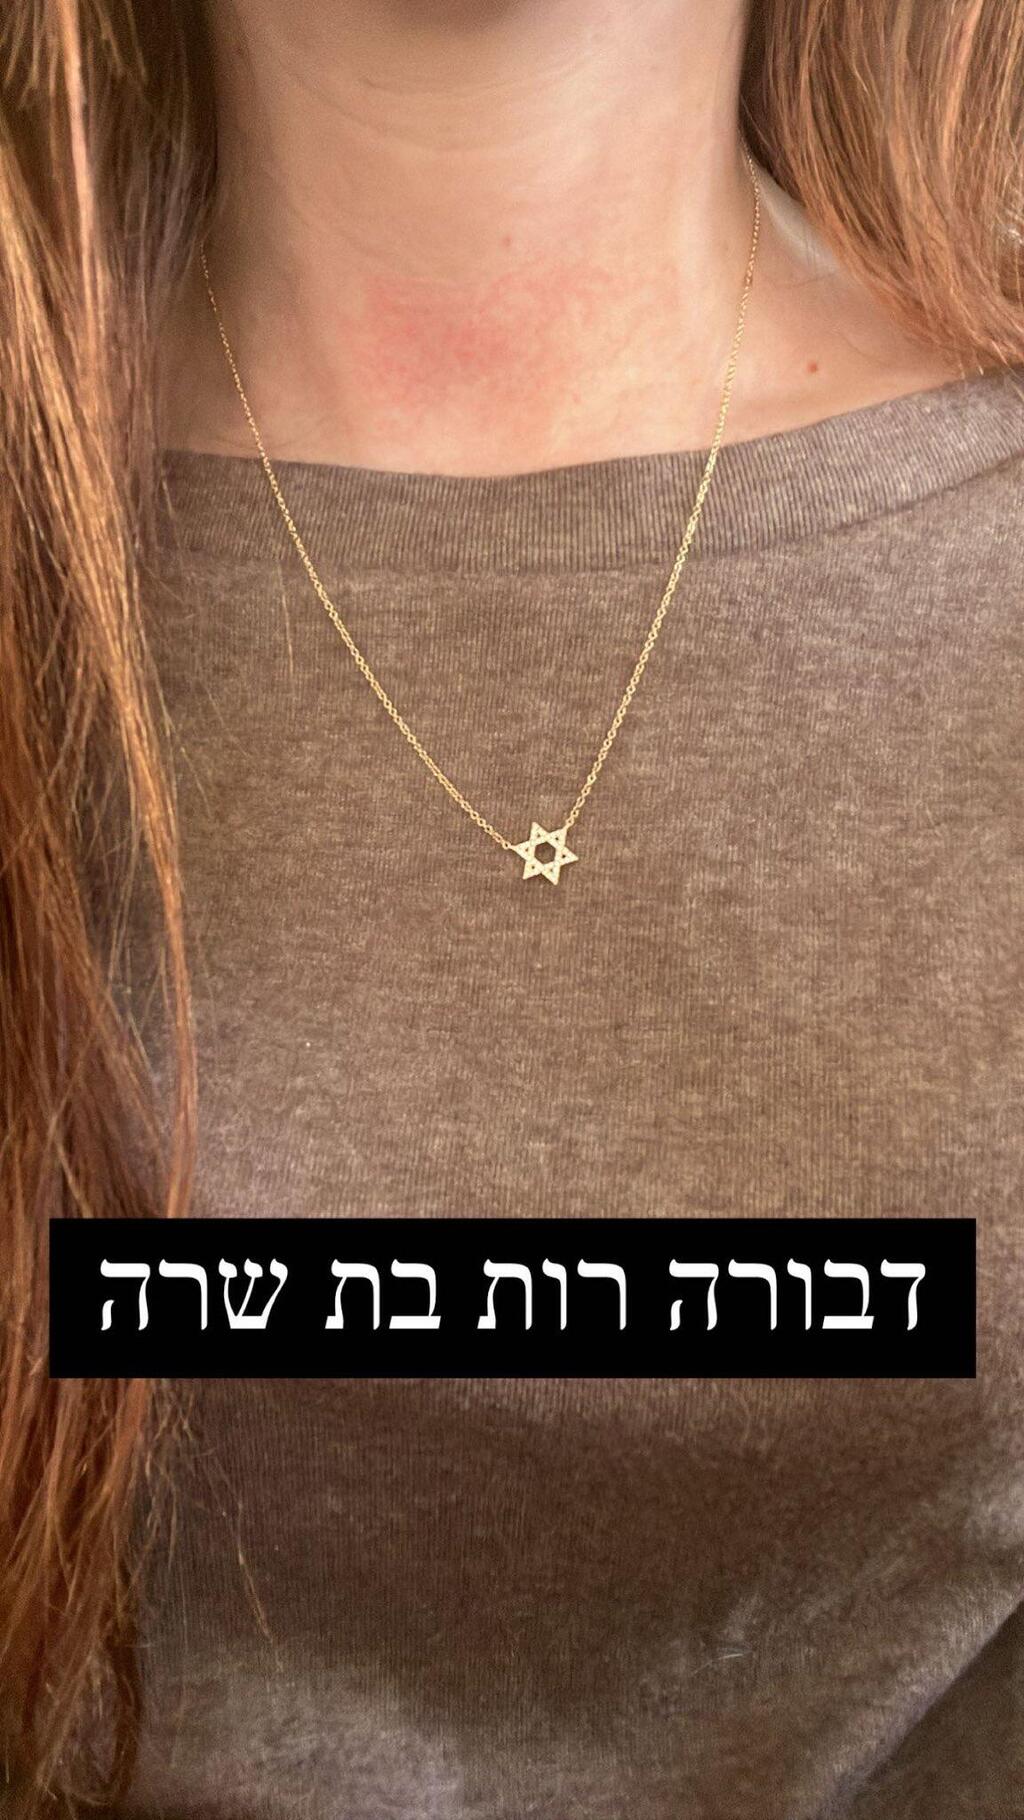 Kassy Dillon Reveals Her Hebrew Name After Conversion